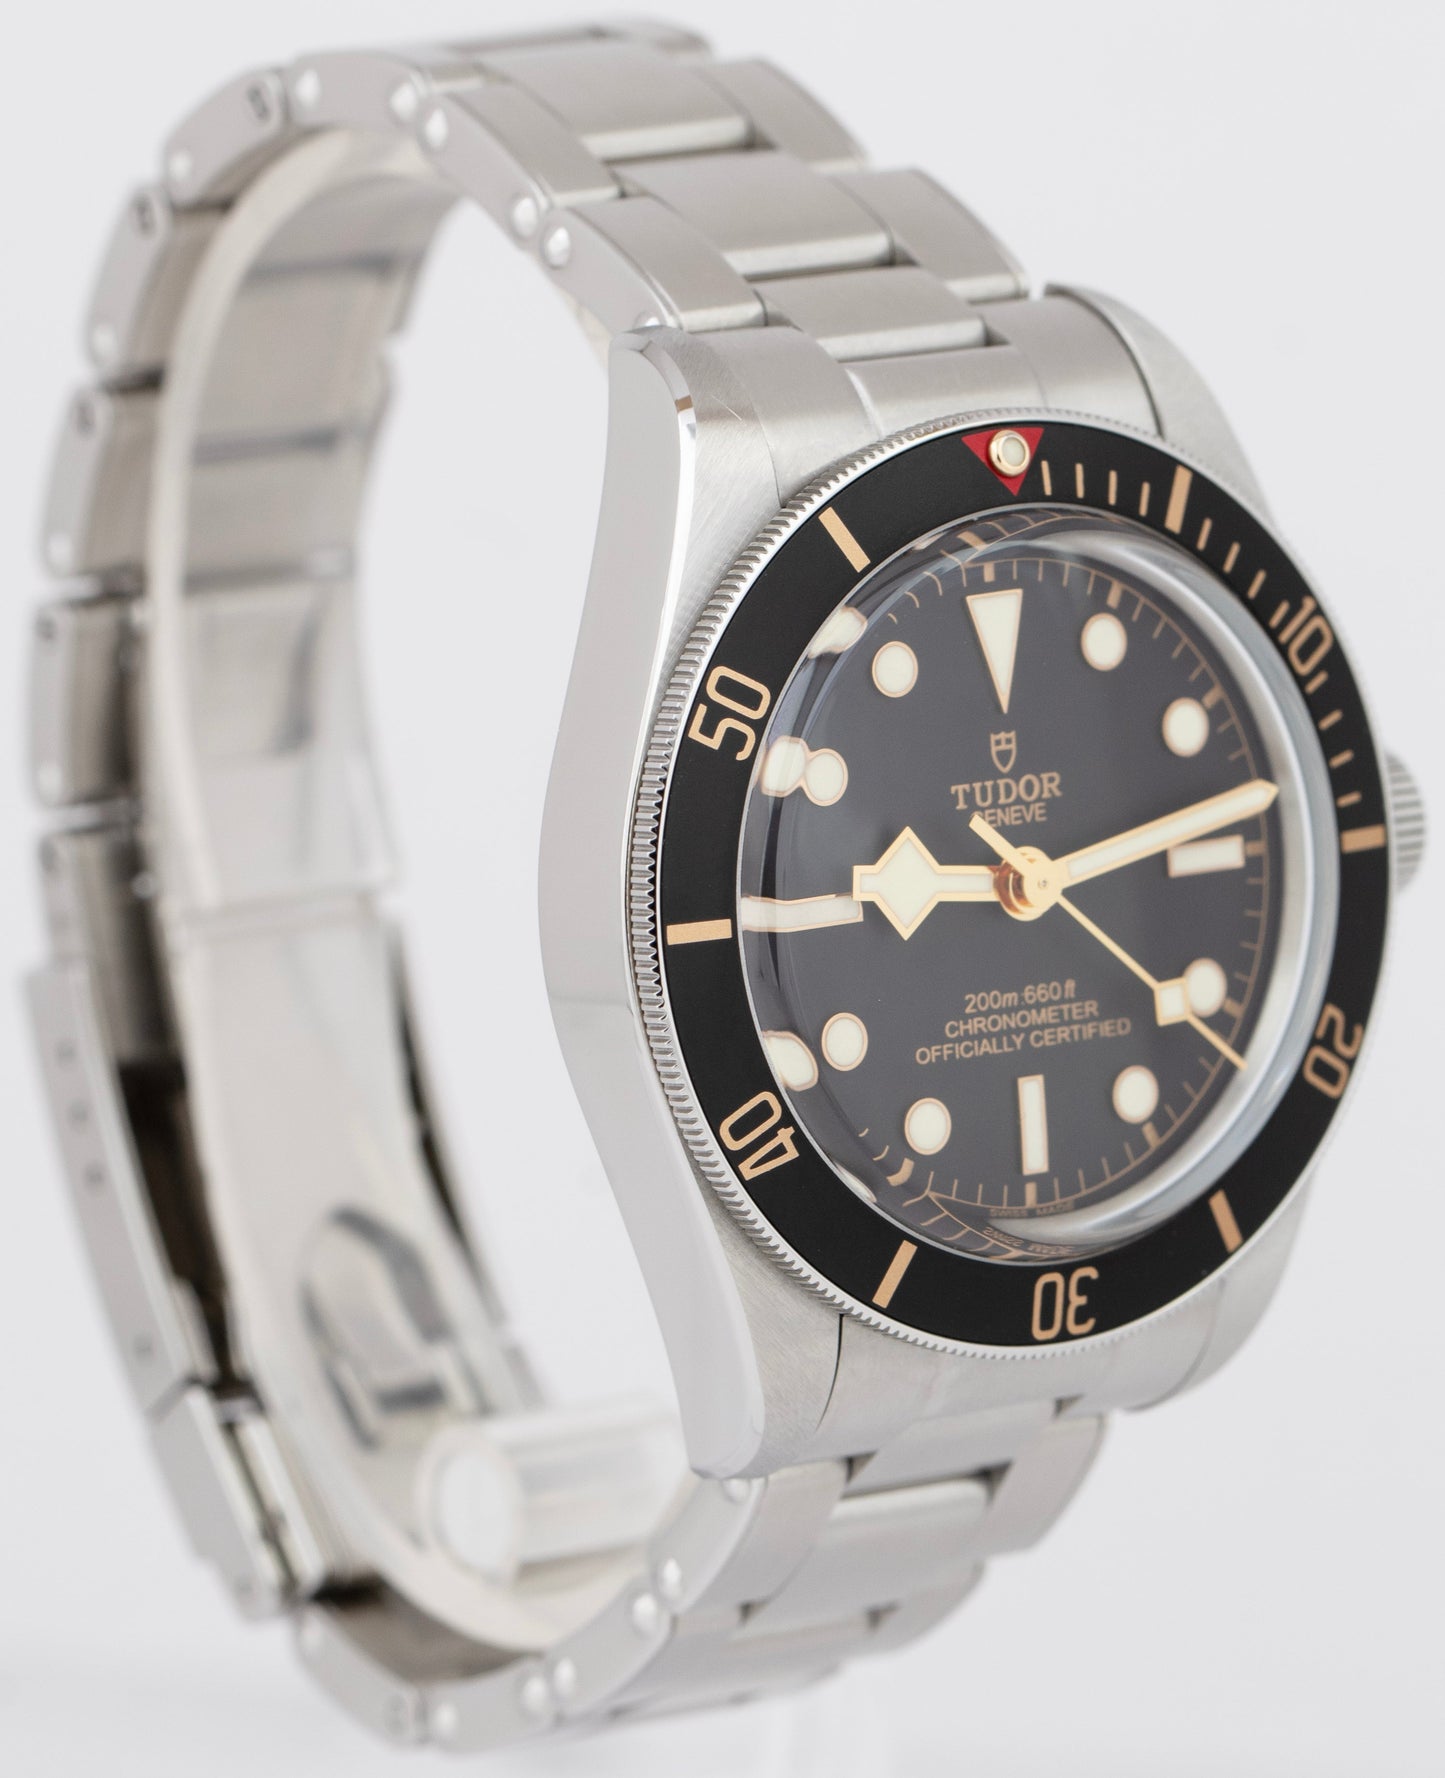 Tudor Black Bay Fifty Eight 58 Black Stainless Steel Automatic 39mm Watch 79030N